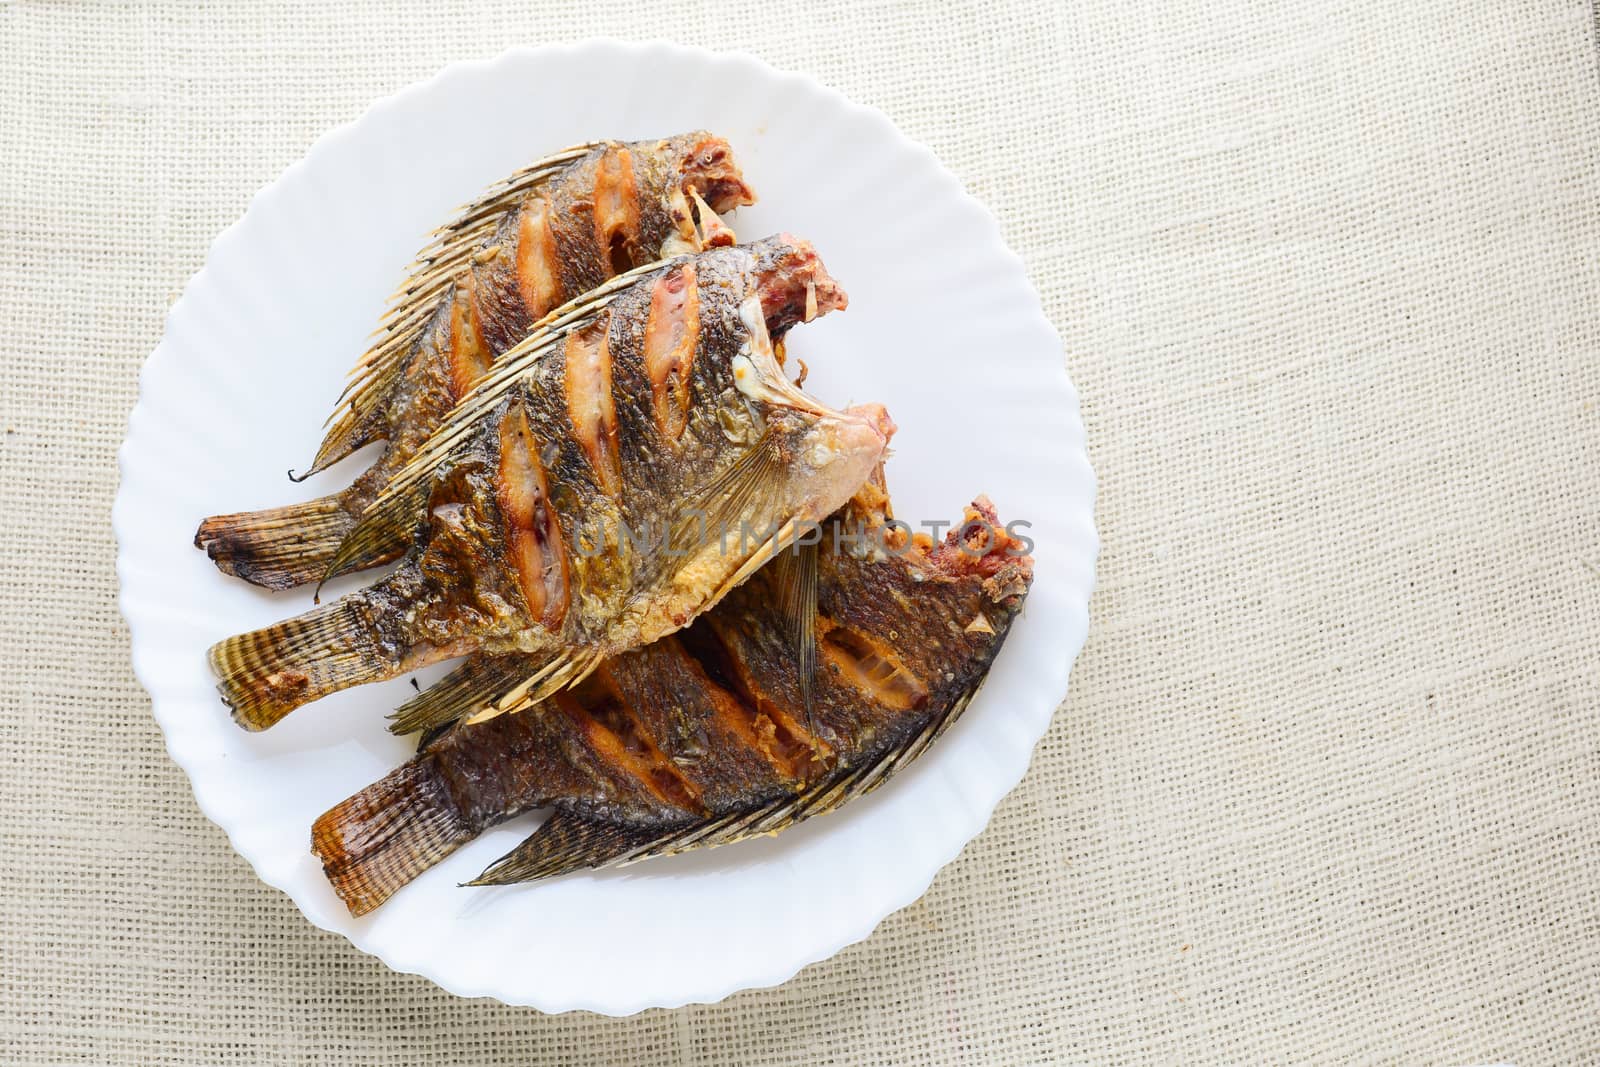 Deep Fried Tilapia Fish with Fish Sauce and Pepper by yuiyuize